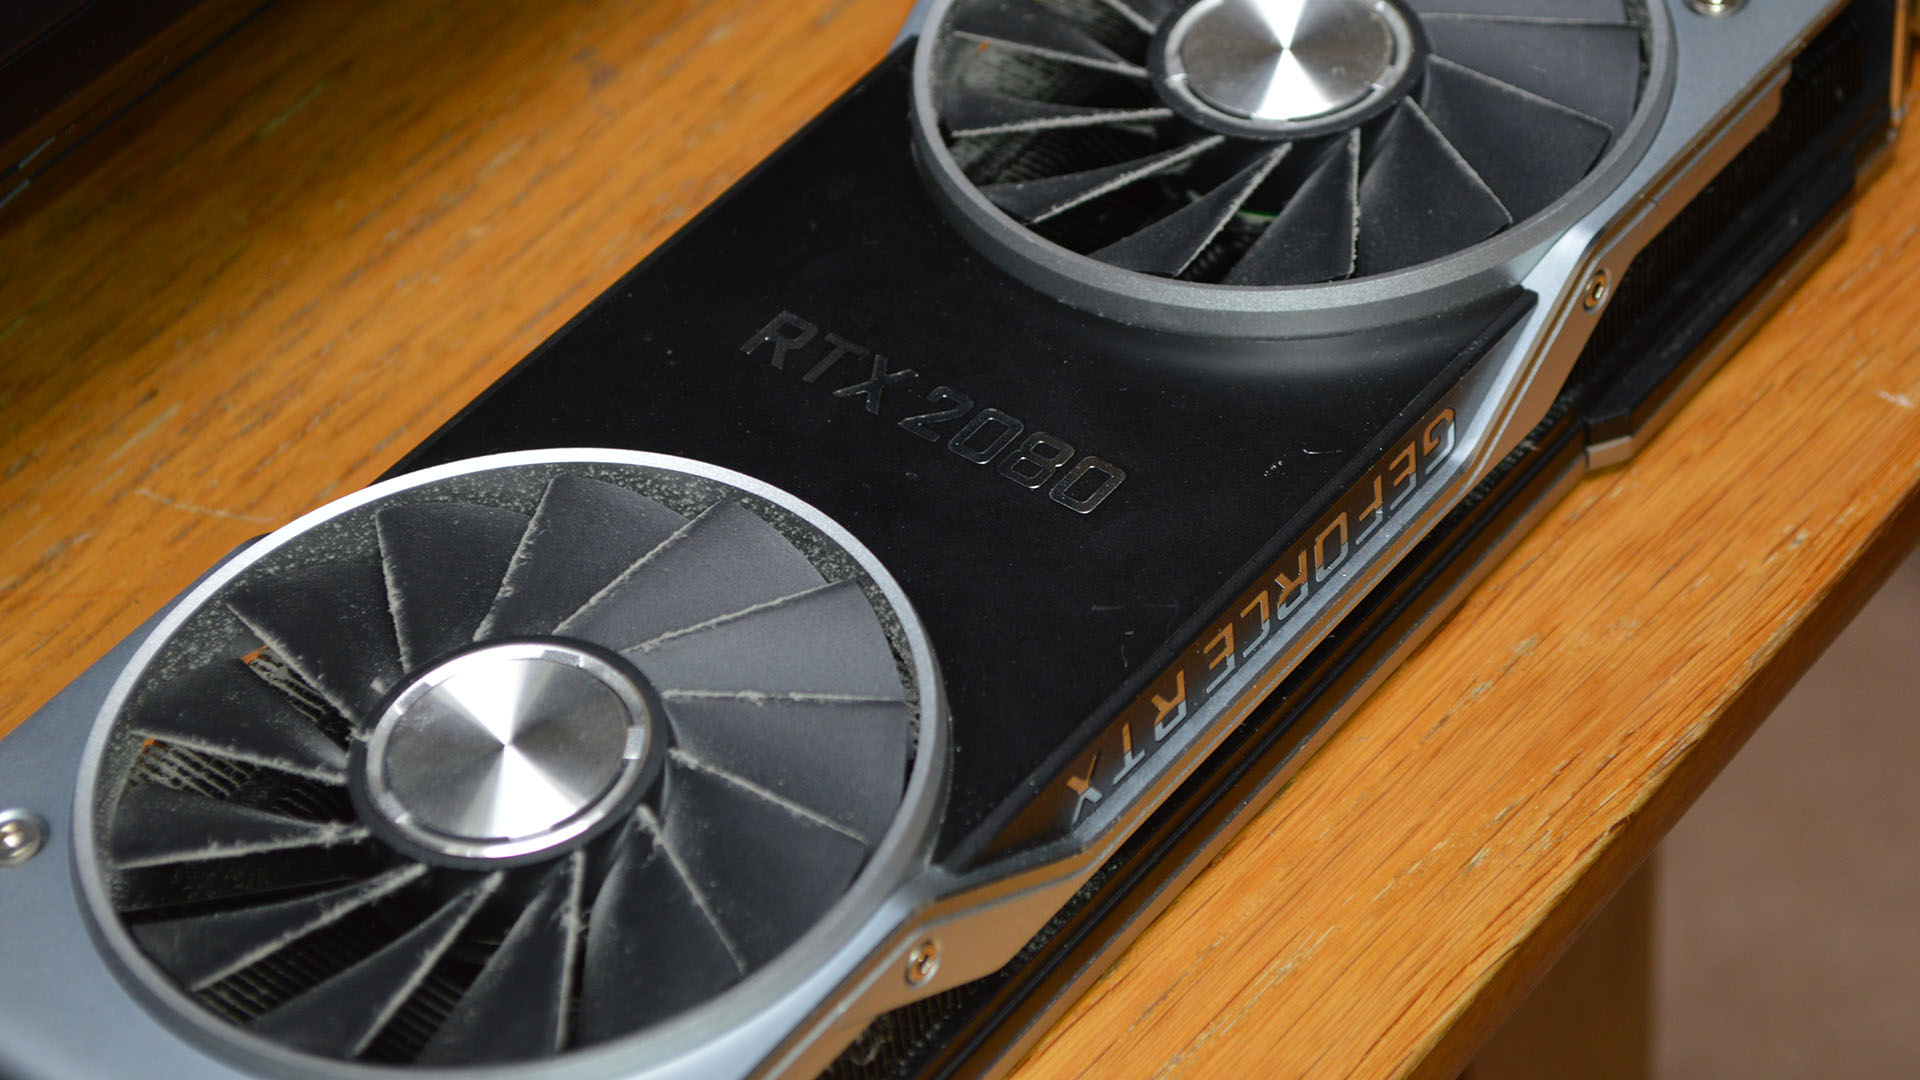 RTX 2080 Founders Edition graphics card